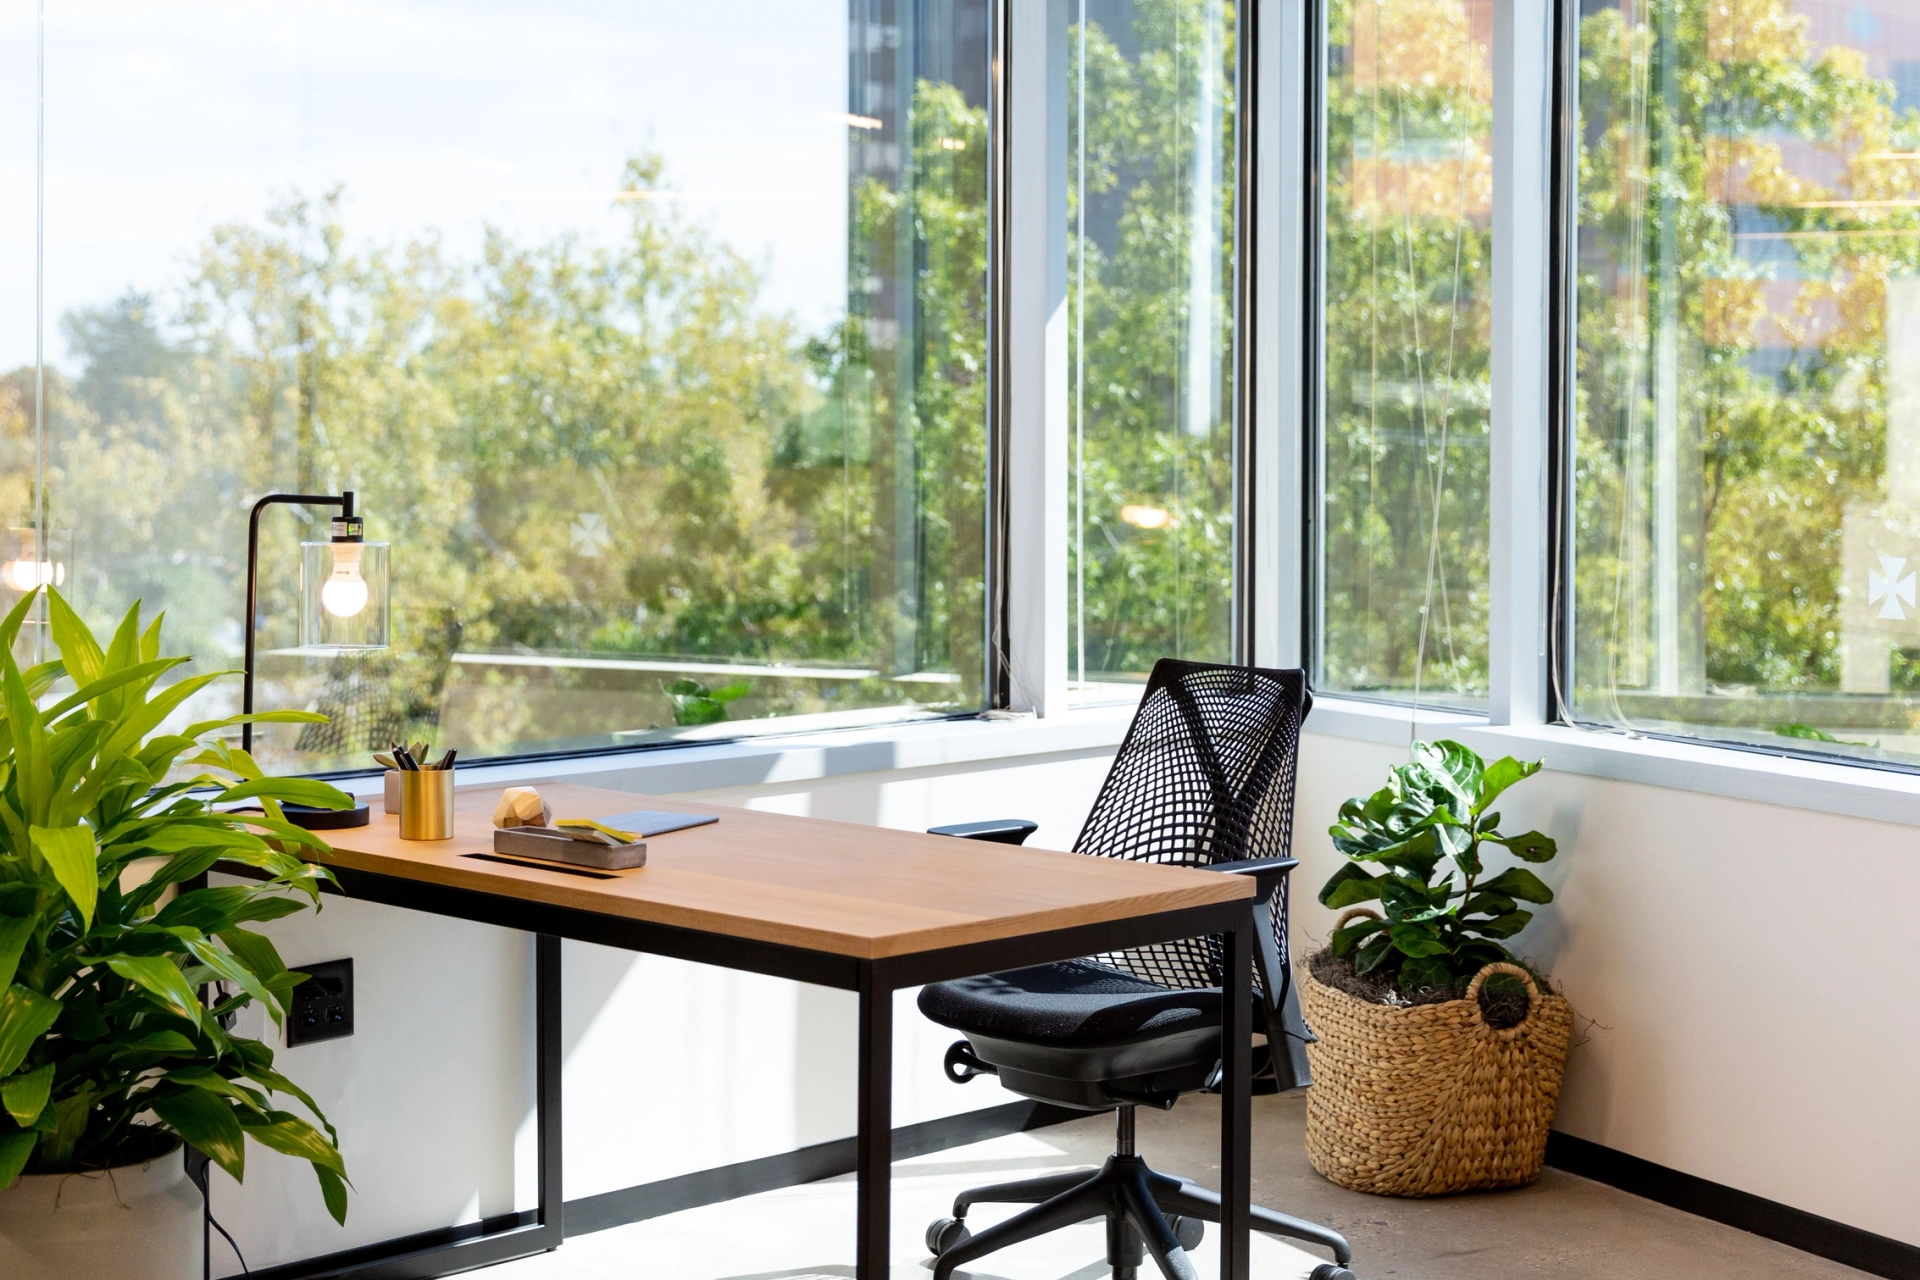 An office space with a desk, chair, and plants suitable for coworking.